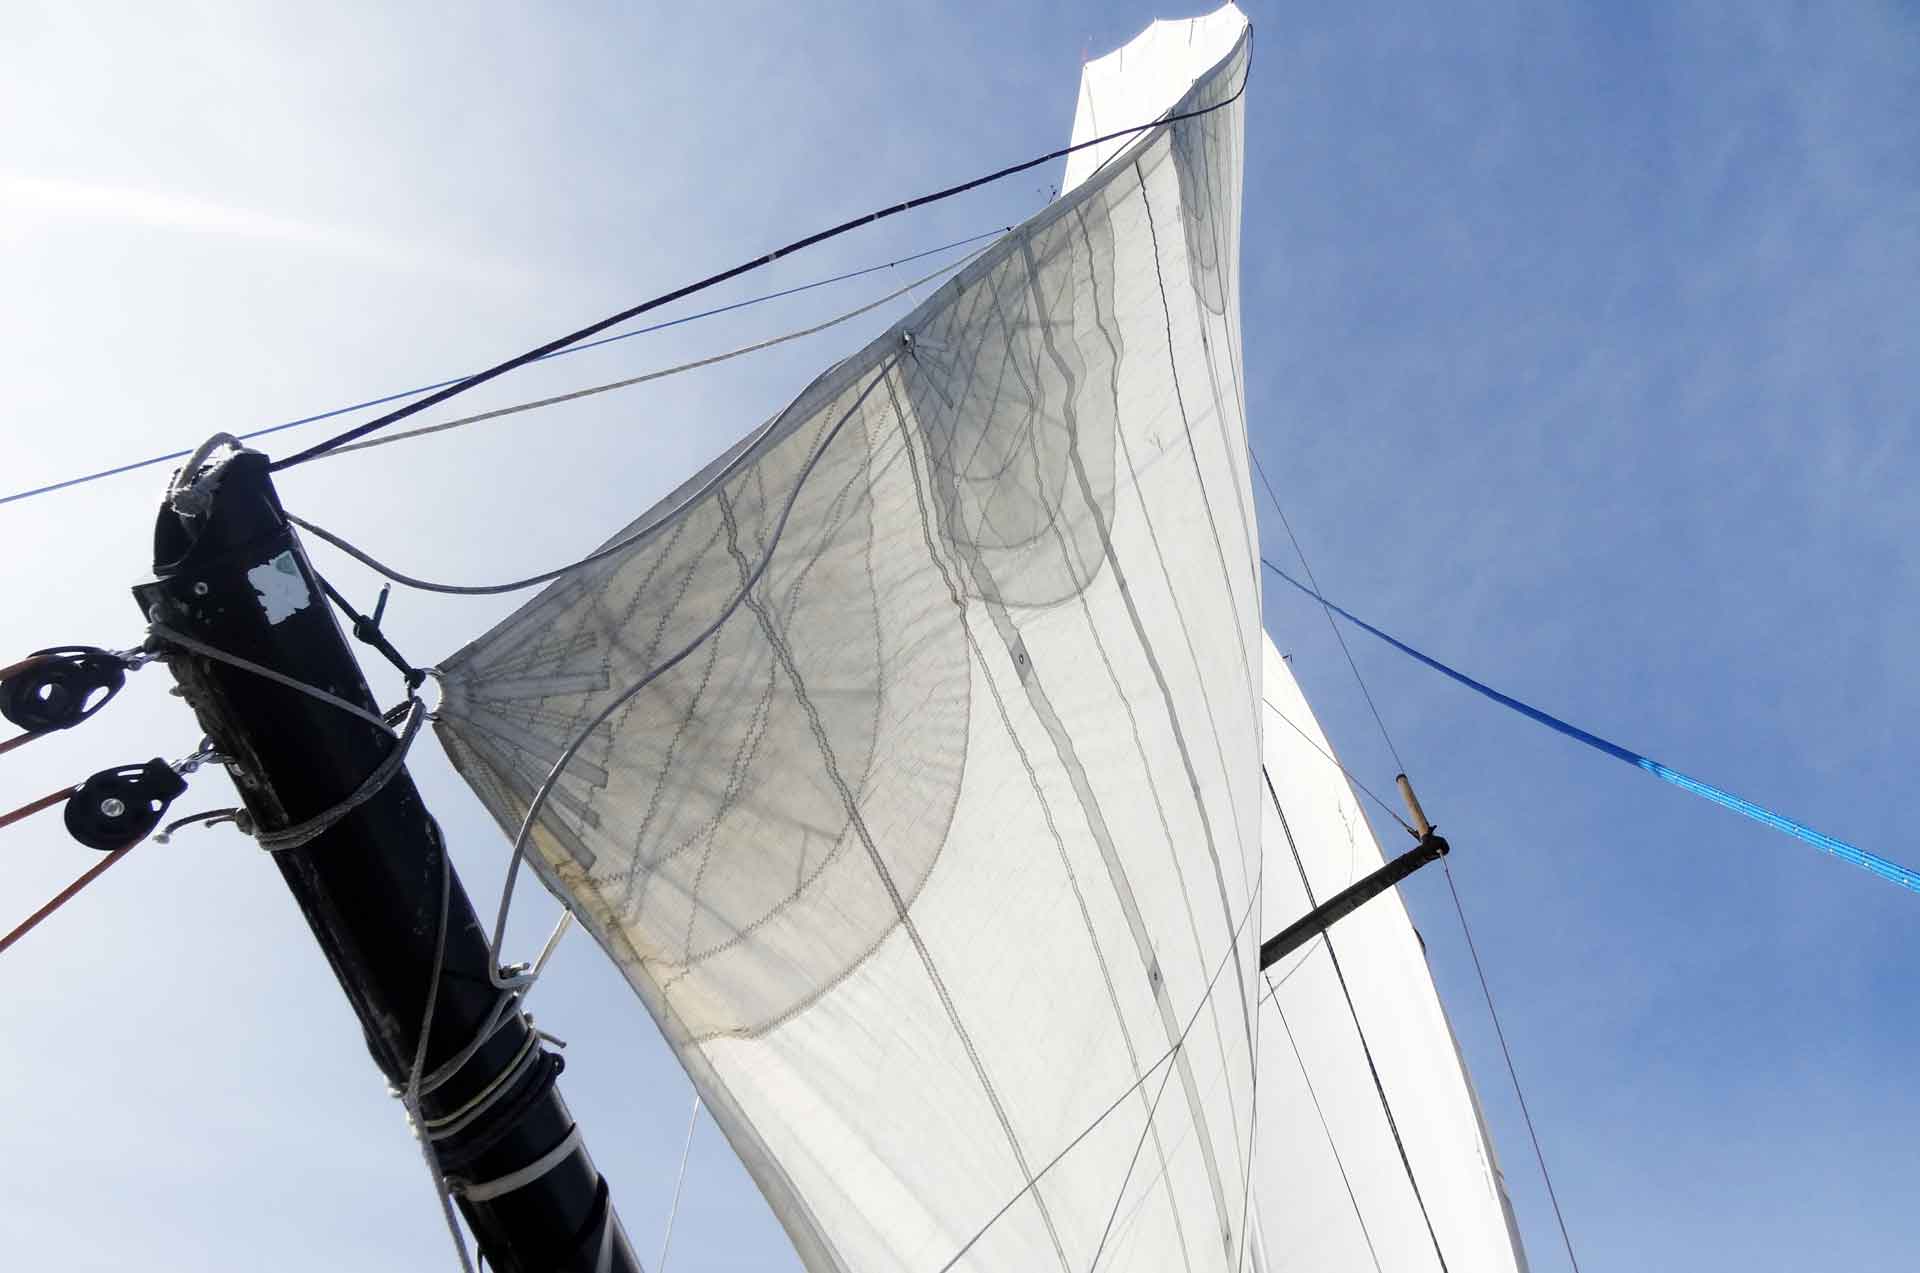 Under Main and Foresails - 15 knots true wind and 11 knots over Ground. That´s efficient Sailing!